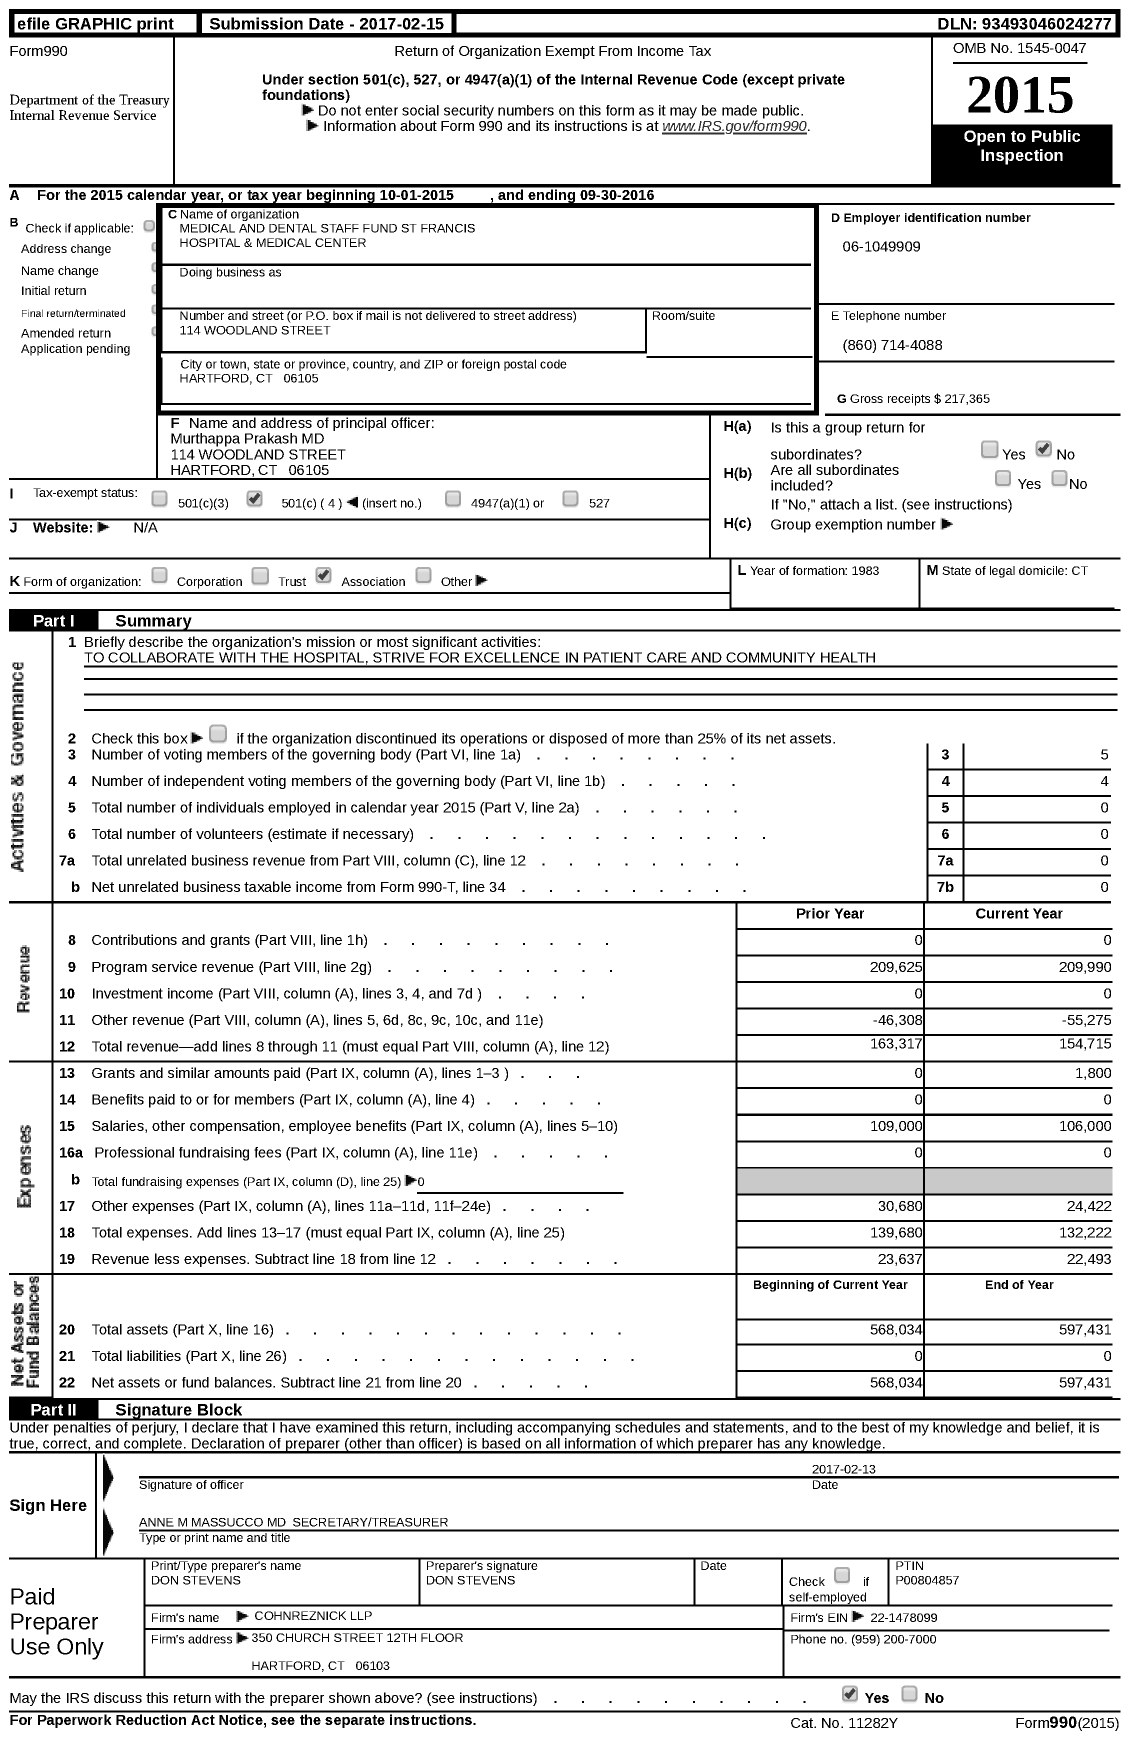 Image of first page of 2015 Form 990 for Medical and Dental Staff Fund St Francis Hospital and Medical Center